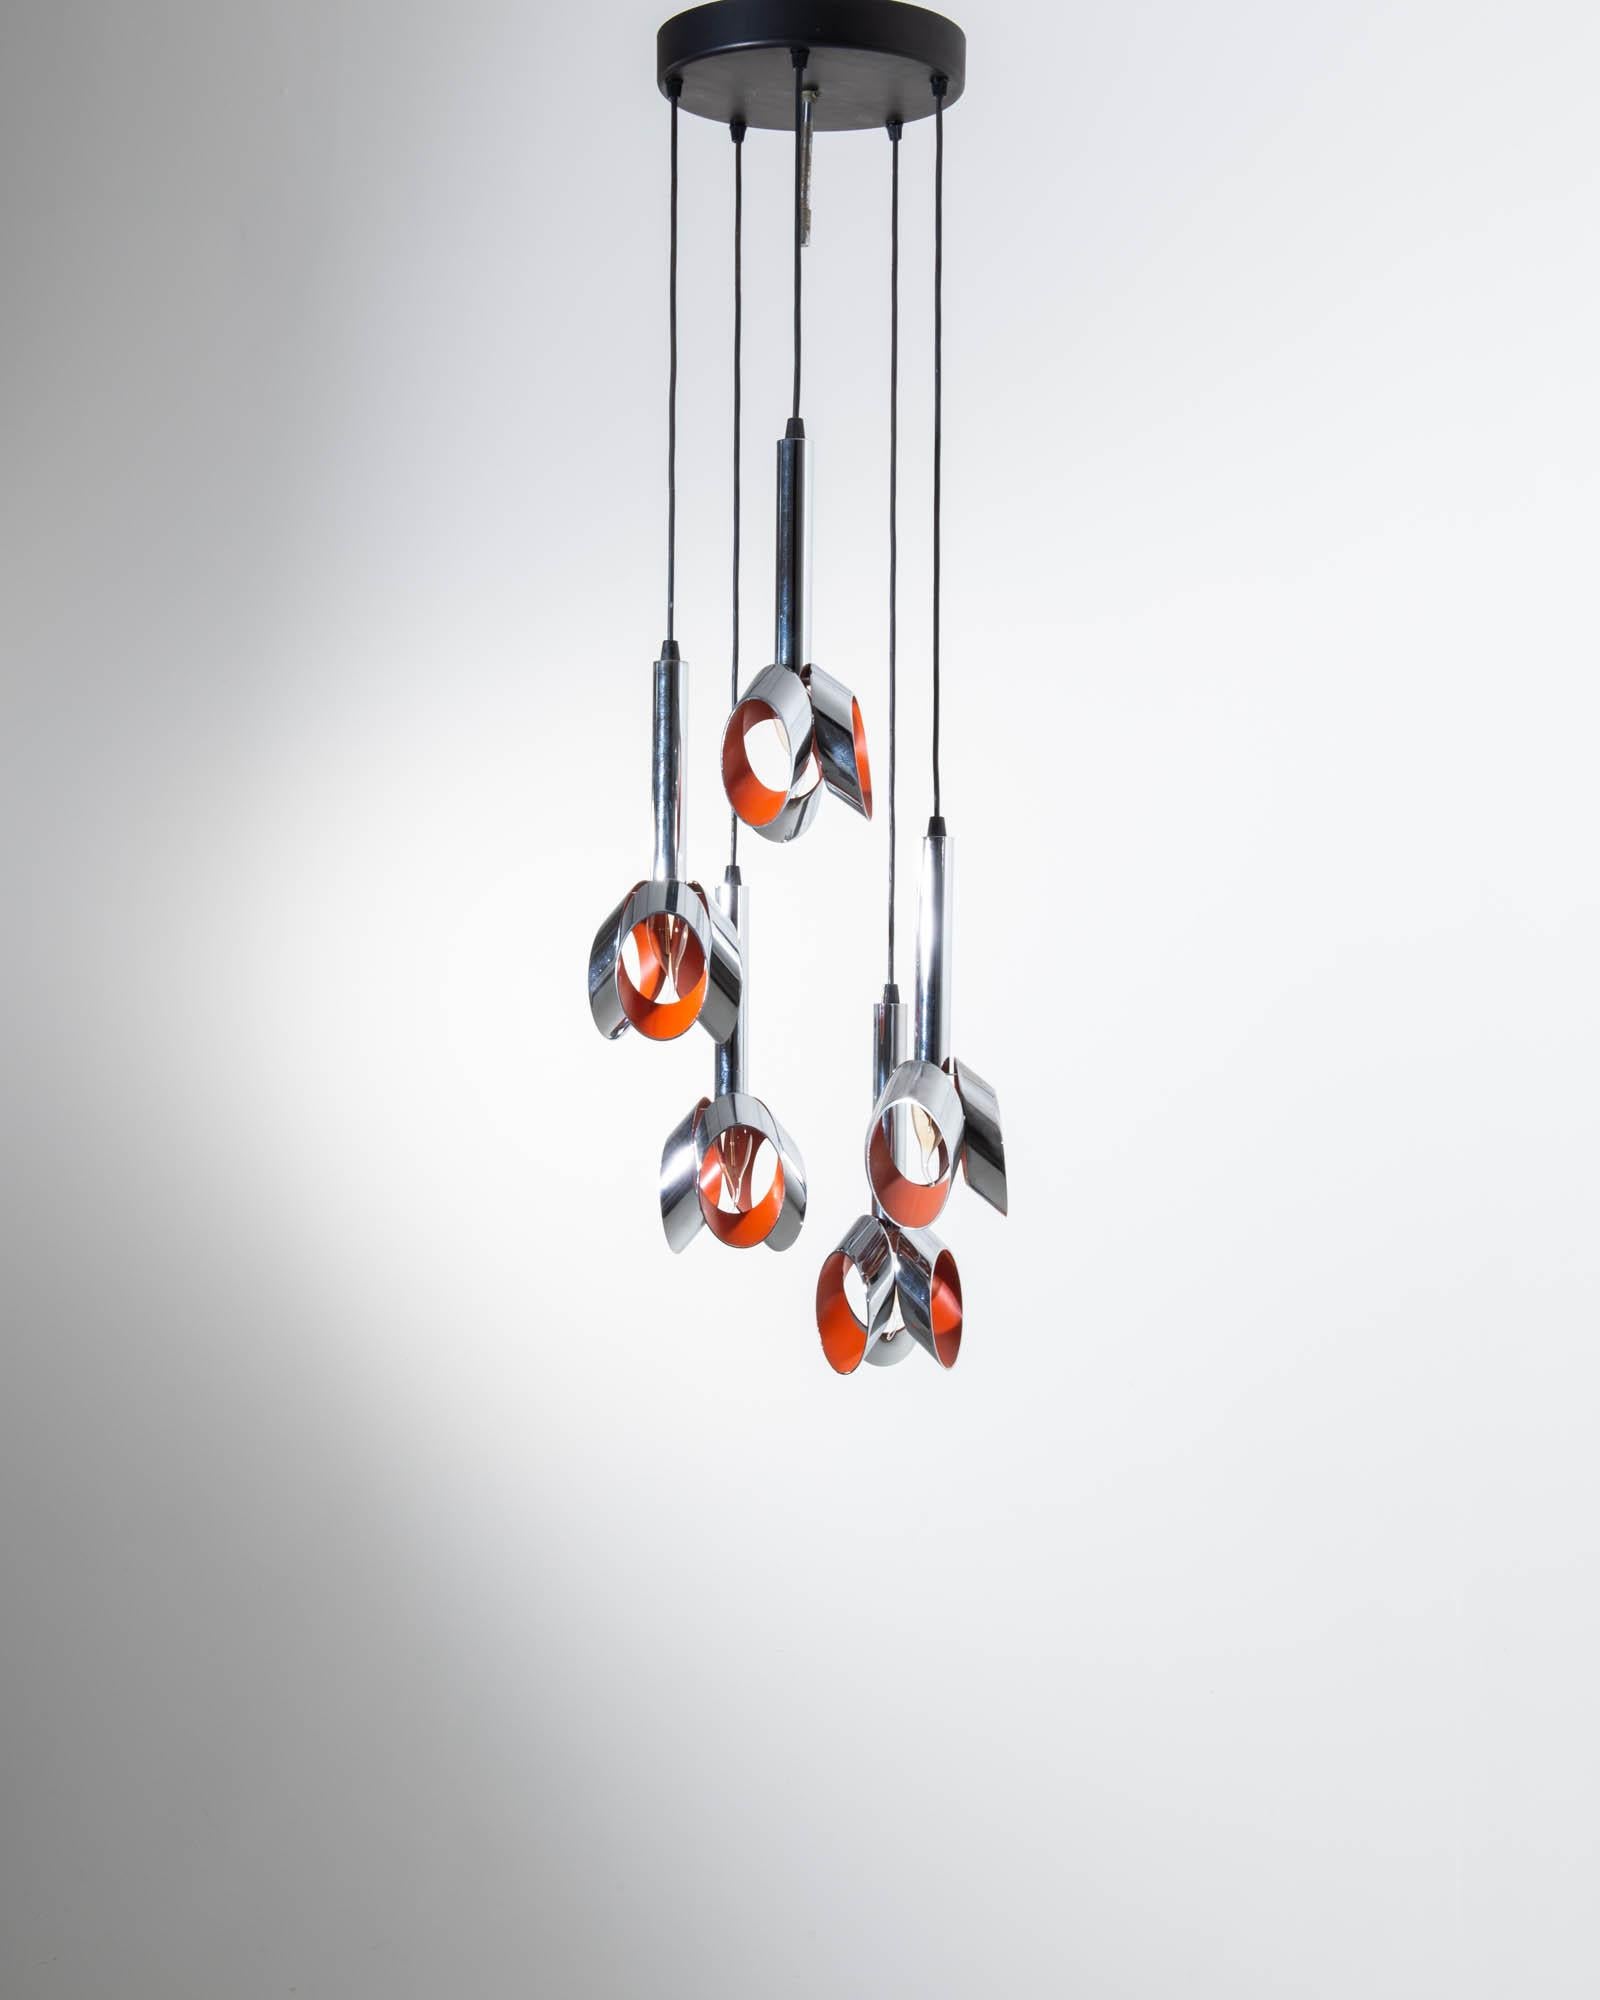 This striking Space Age chandelier makes a one of a kind accent. Made in France in the 20th century, the design combines formal elegance with a bold science fiction twist. The shades of the five pendant bulbs are composed of a trio of metal